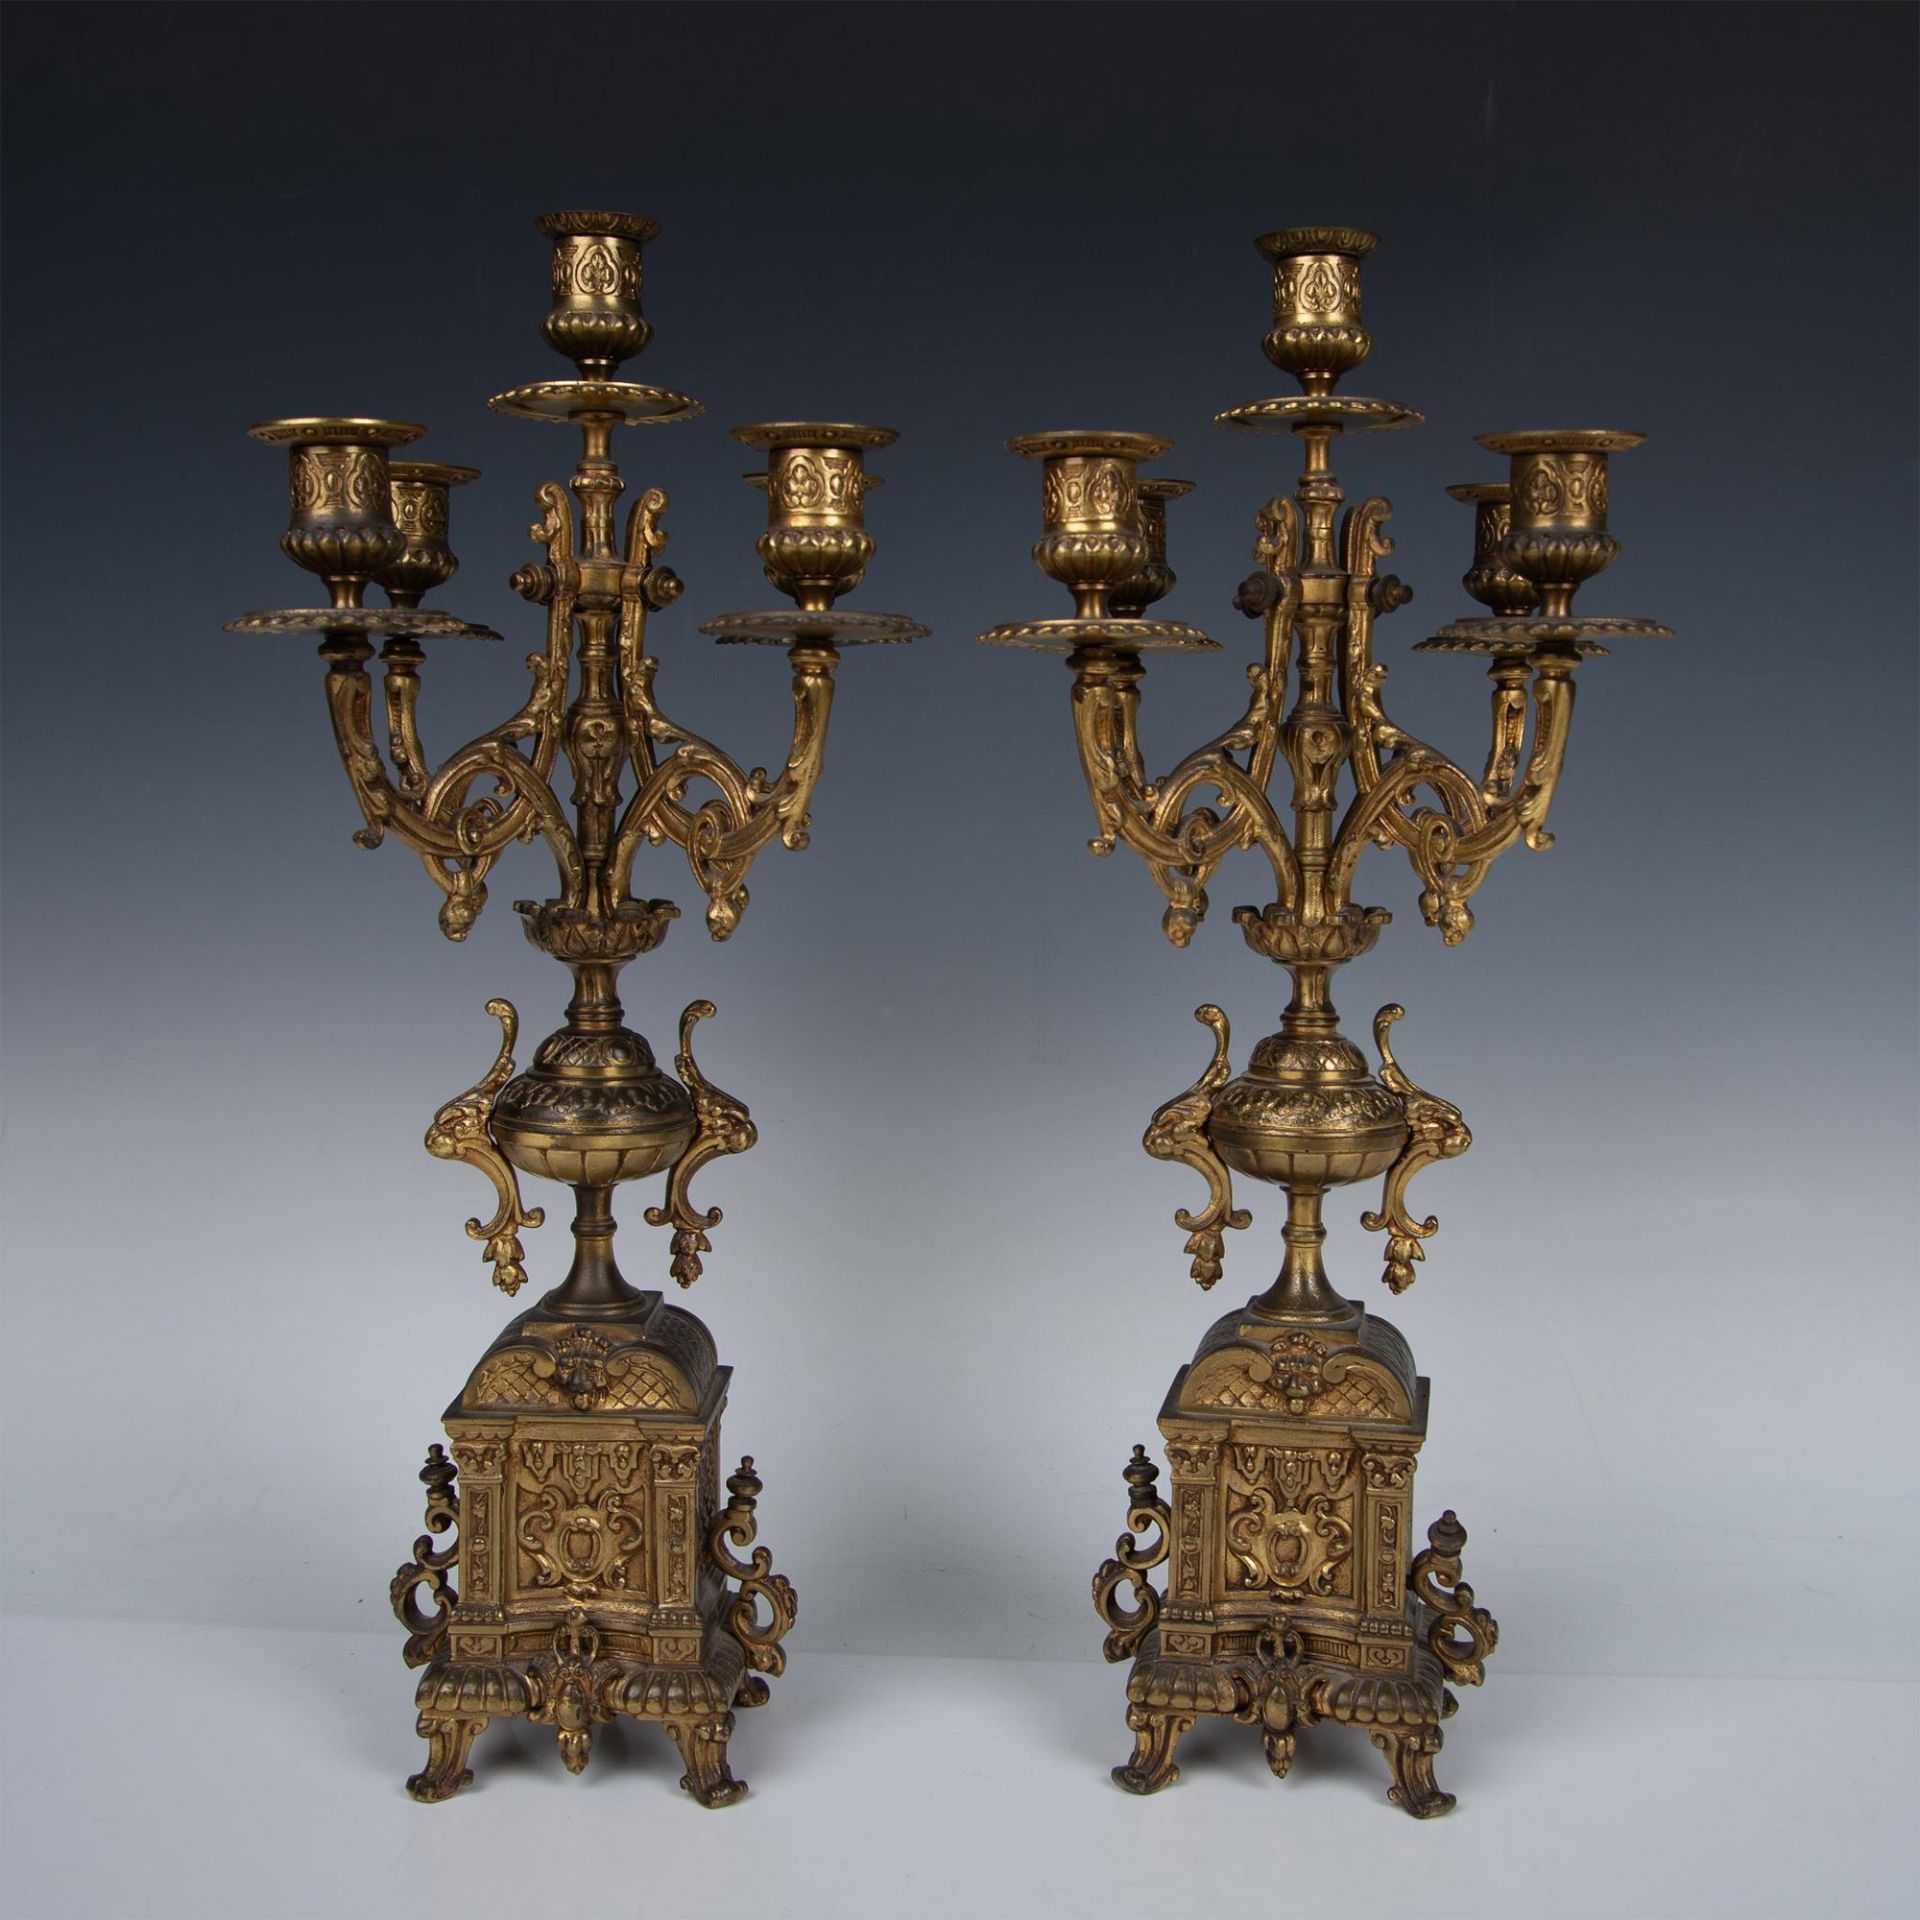 Pair of Brass Baroque Style Mantel Candelabras - Image 3 of 7